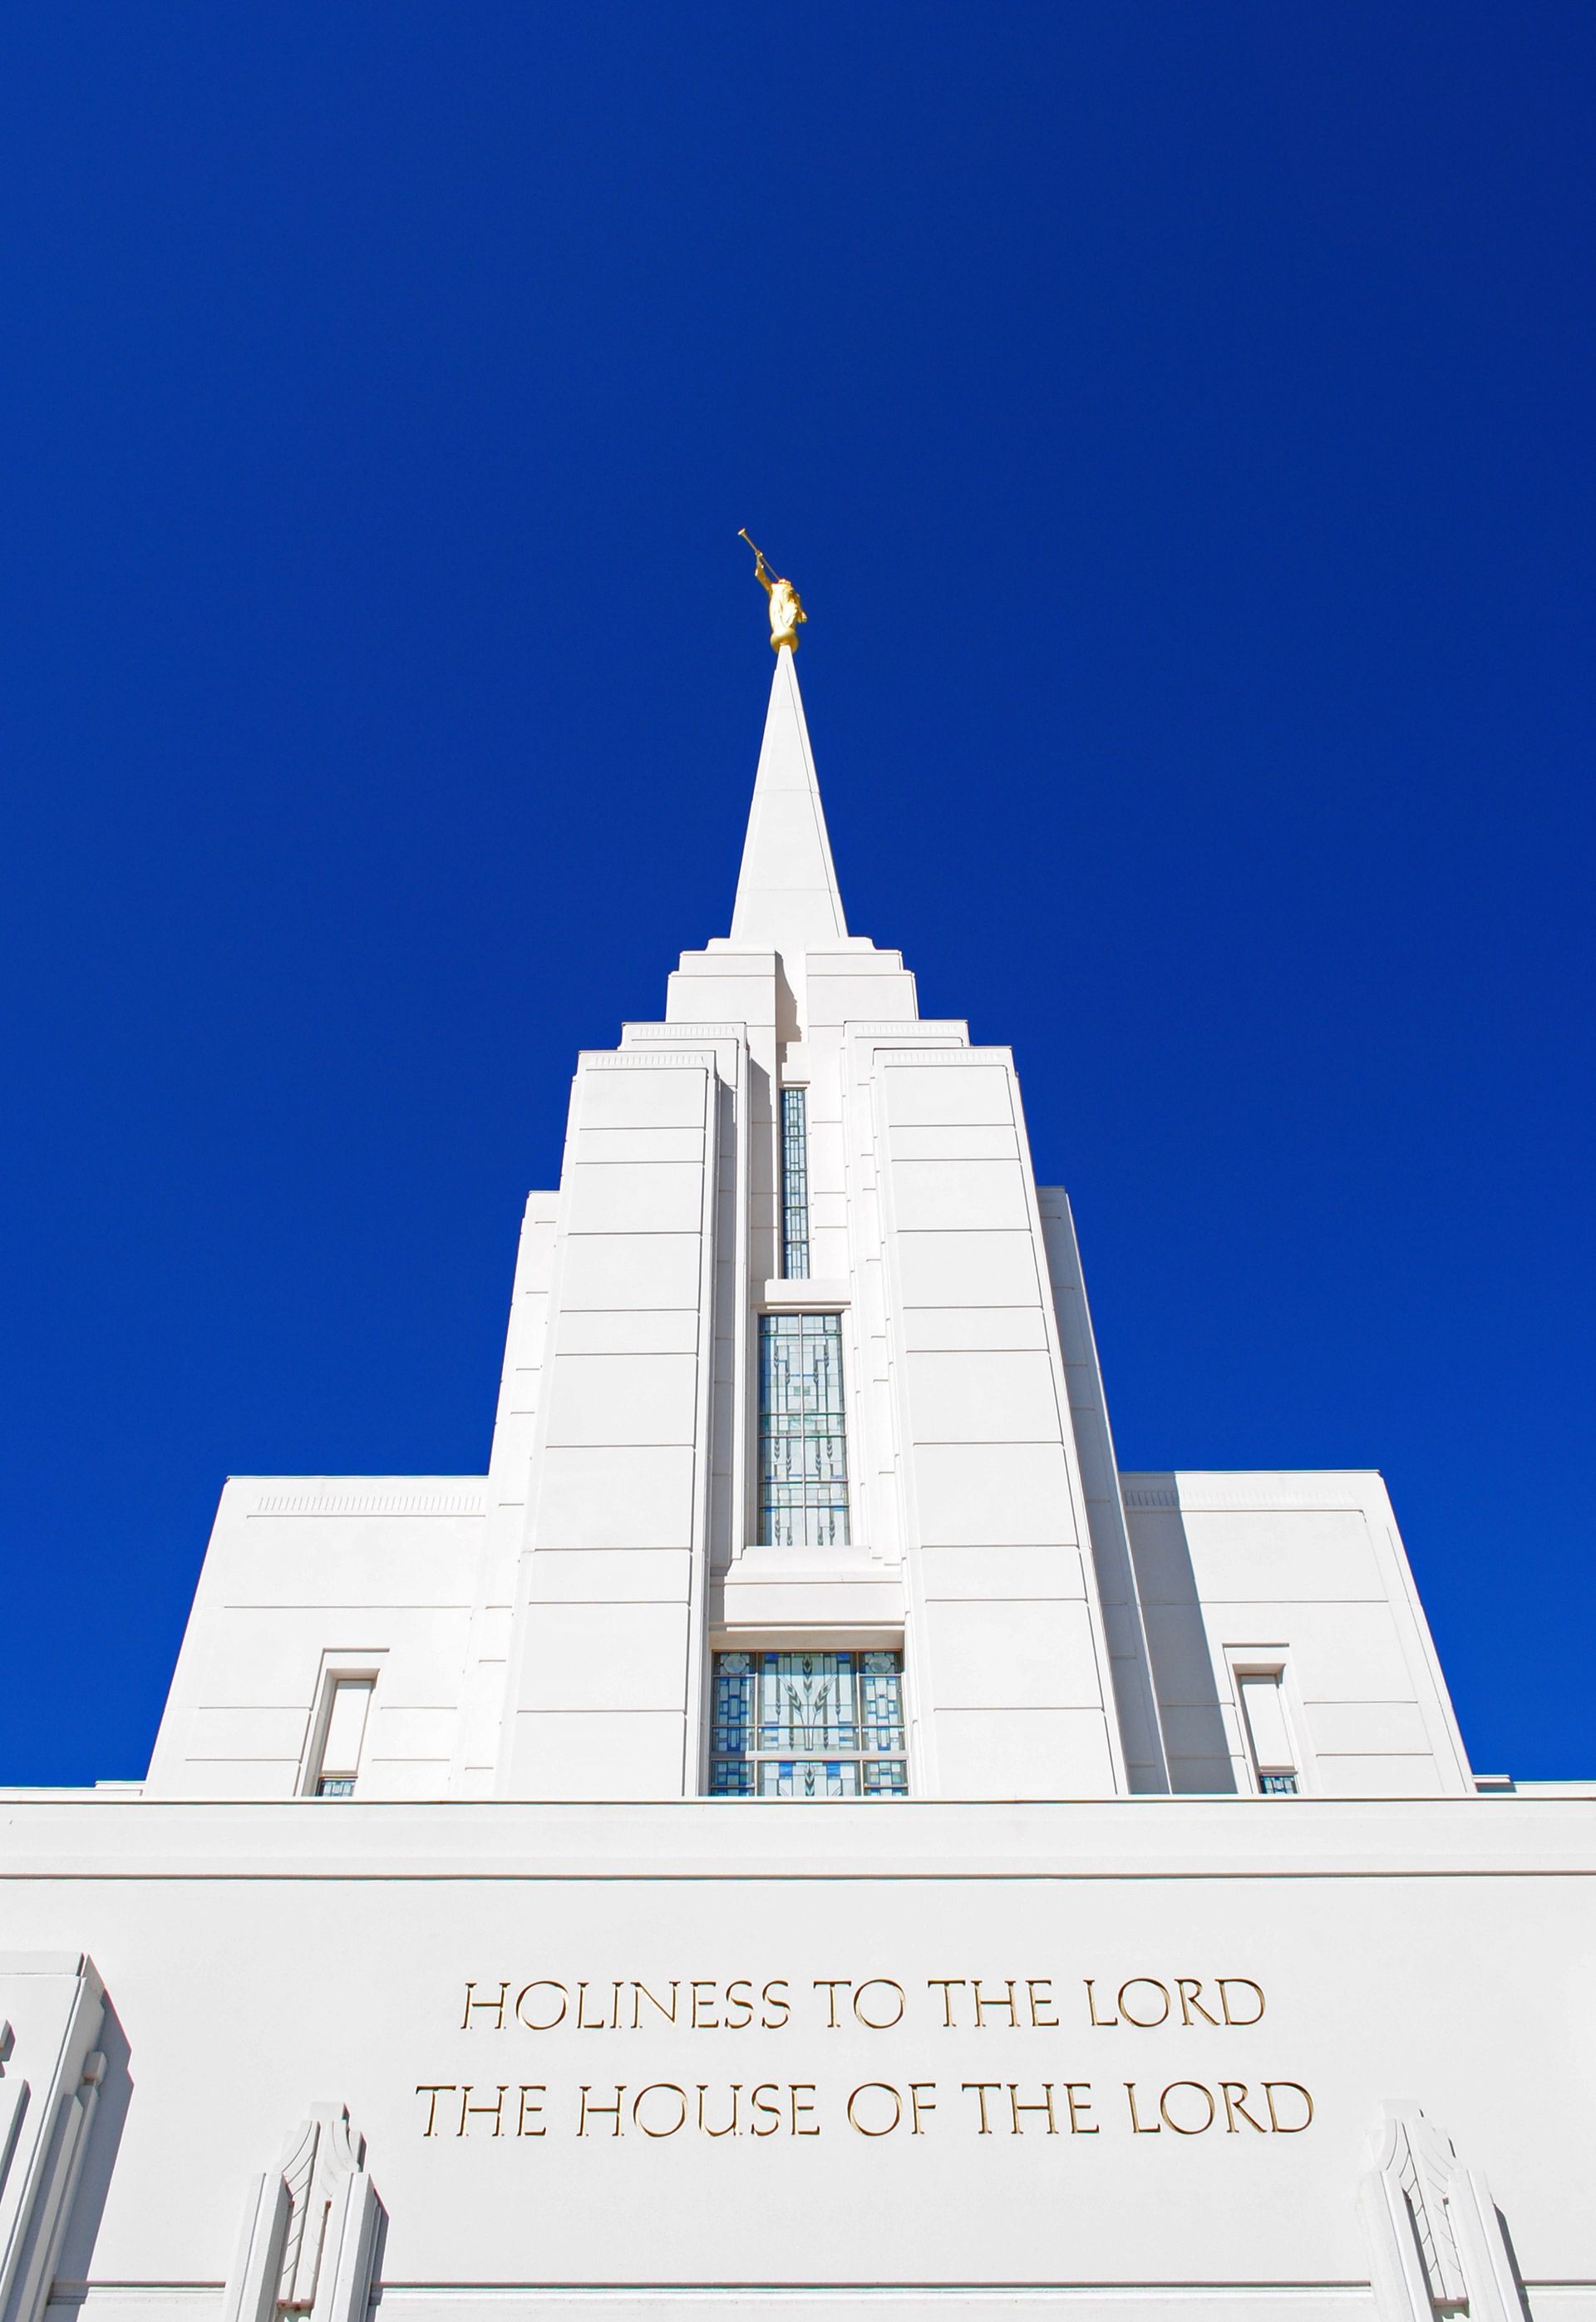 The Rexburg Idaho Temple inscription, “Holiness to the Lord: The House of the Lord,” including the spire.